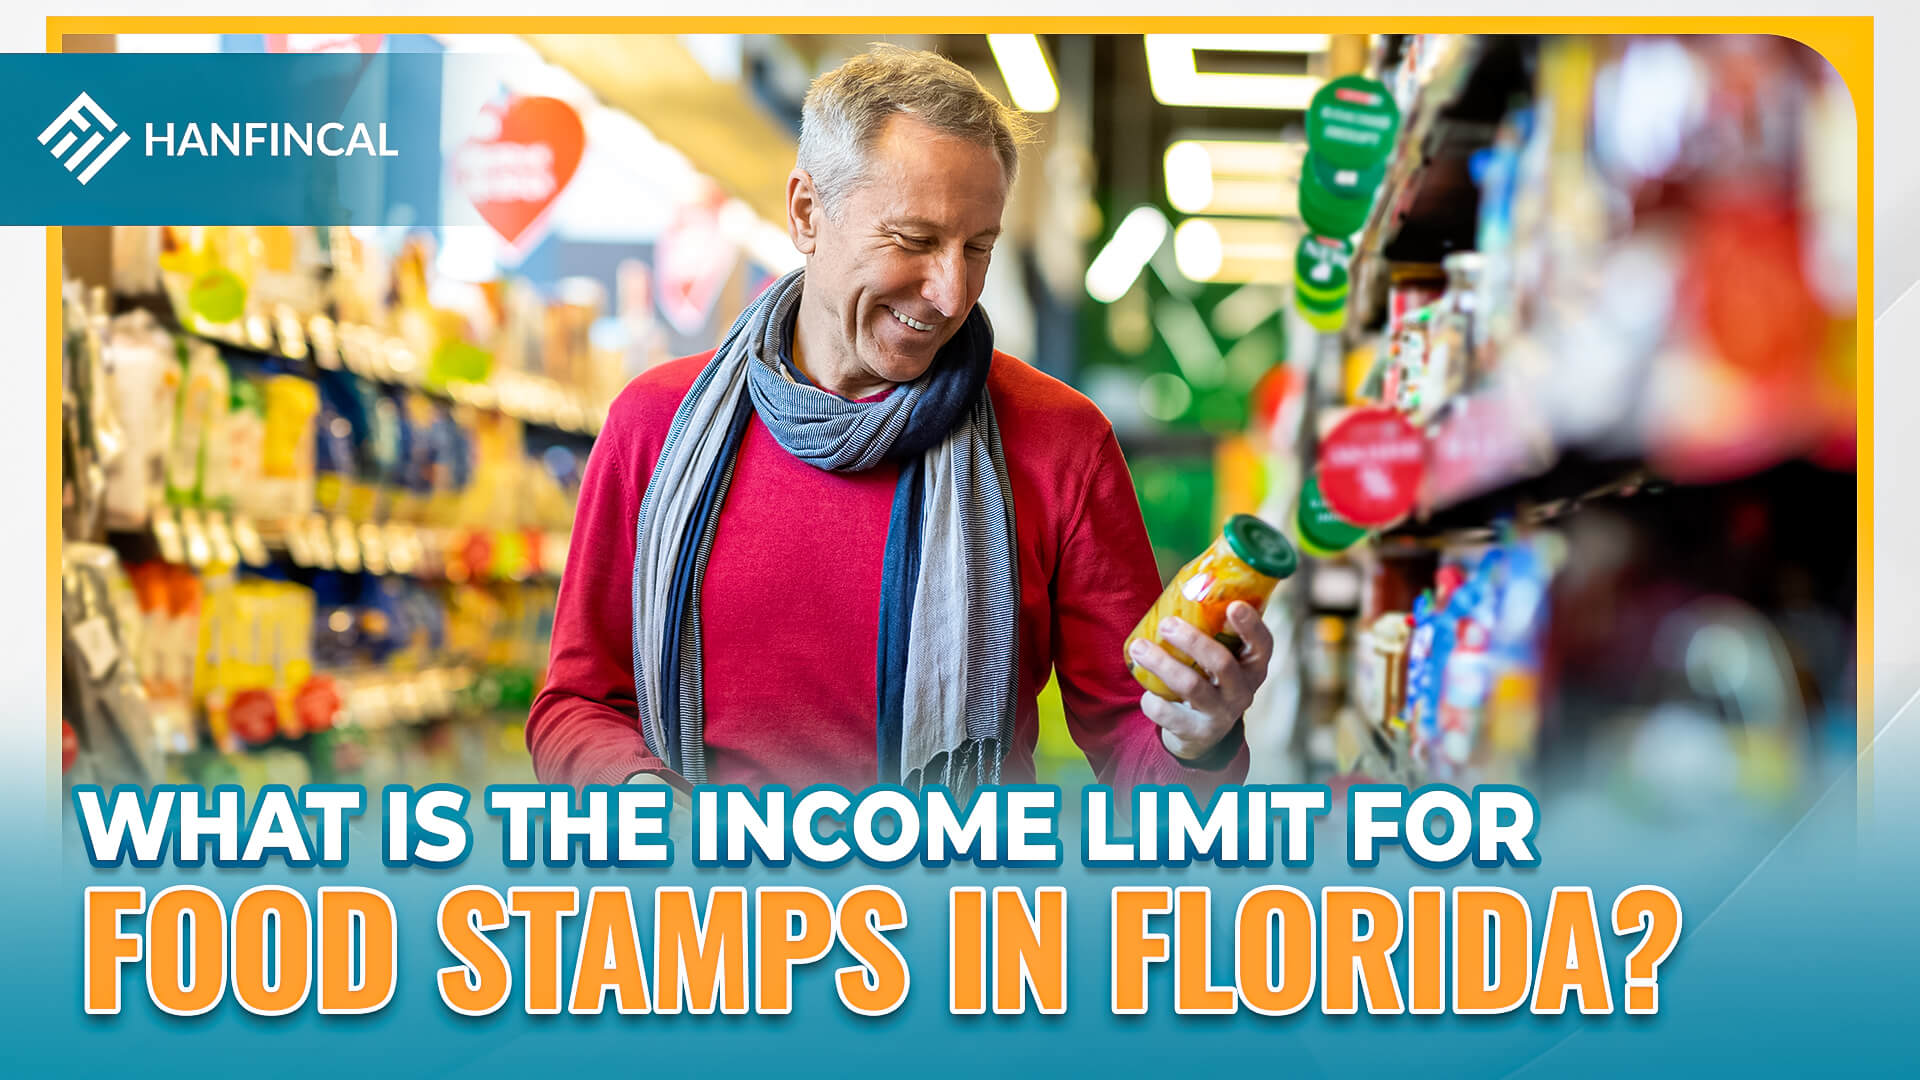 What is the income limit for Food Stamps in Florida (FL)?